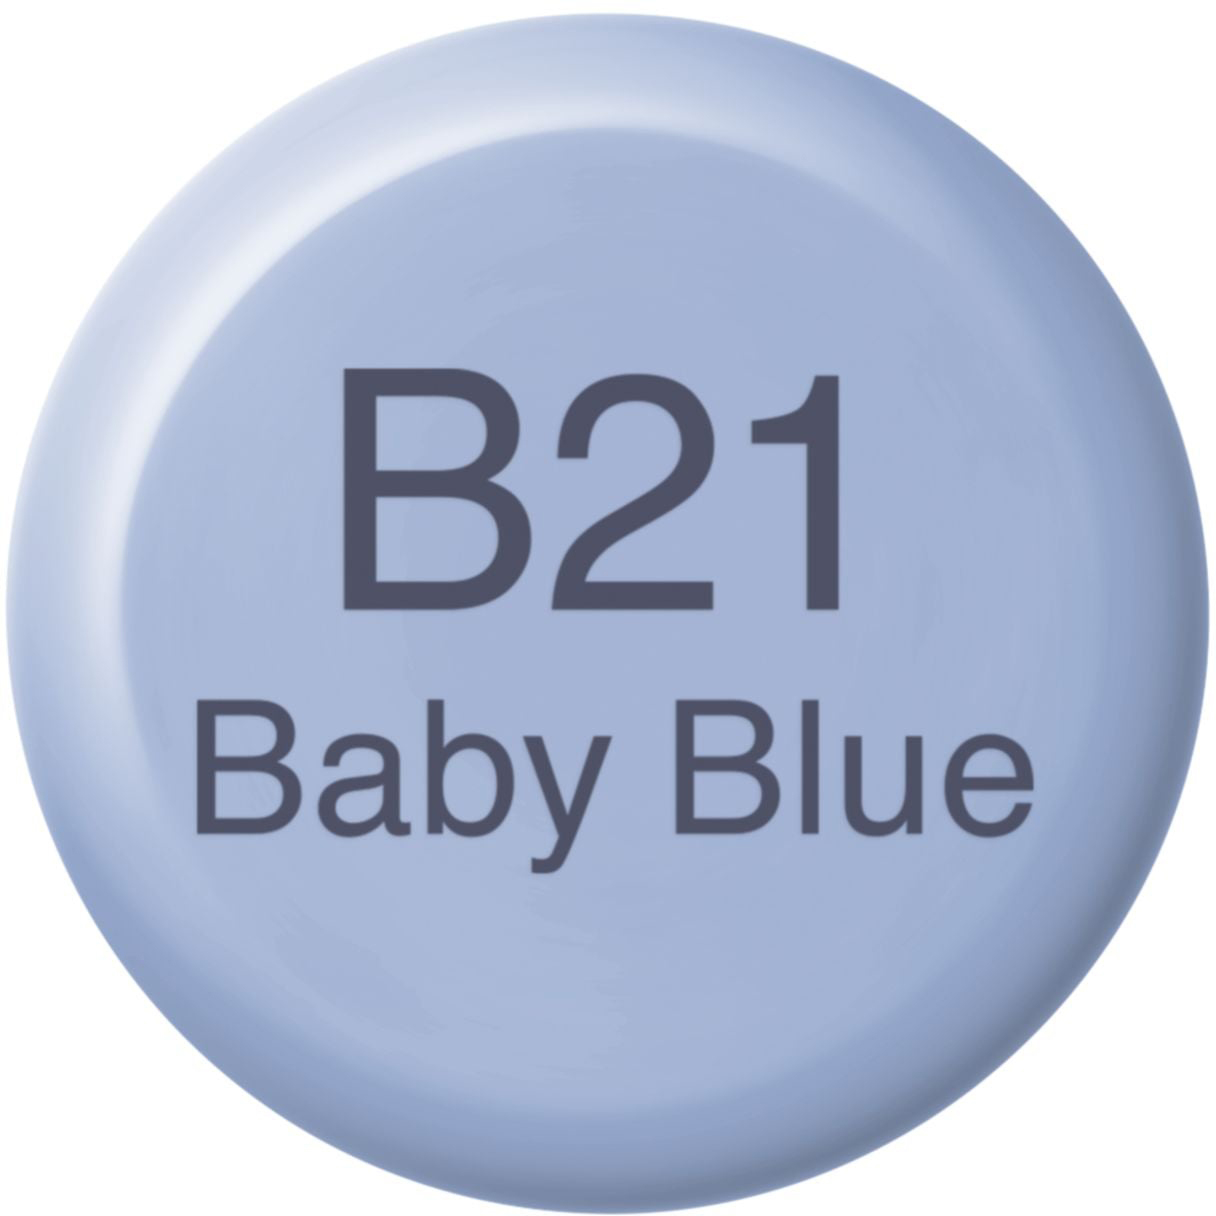 COPIC Ink Refill 21076225 B21 - Baby Blue